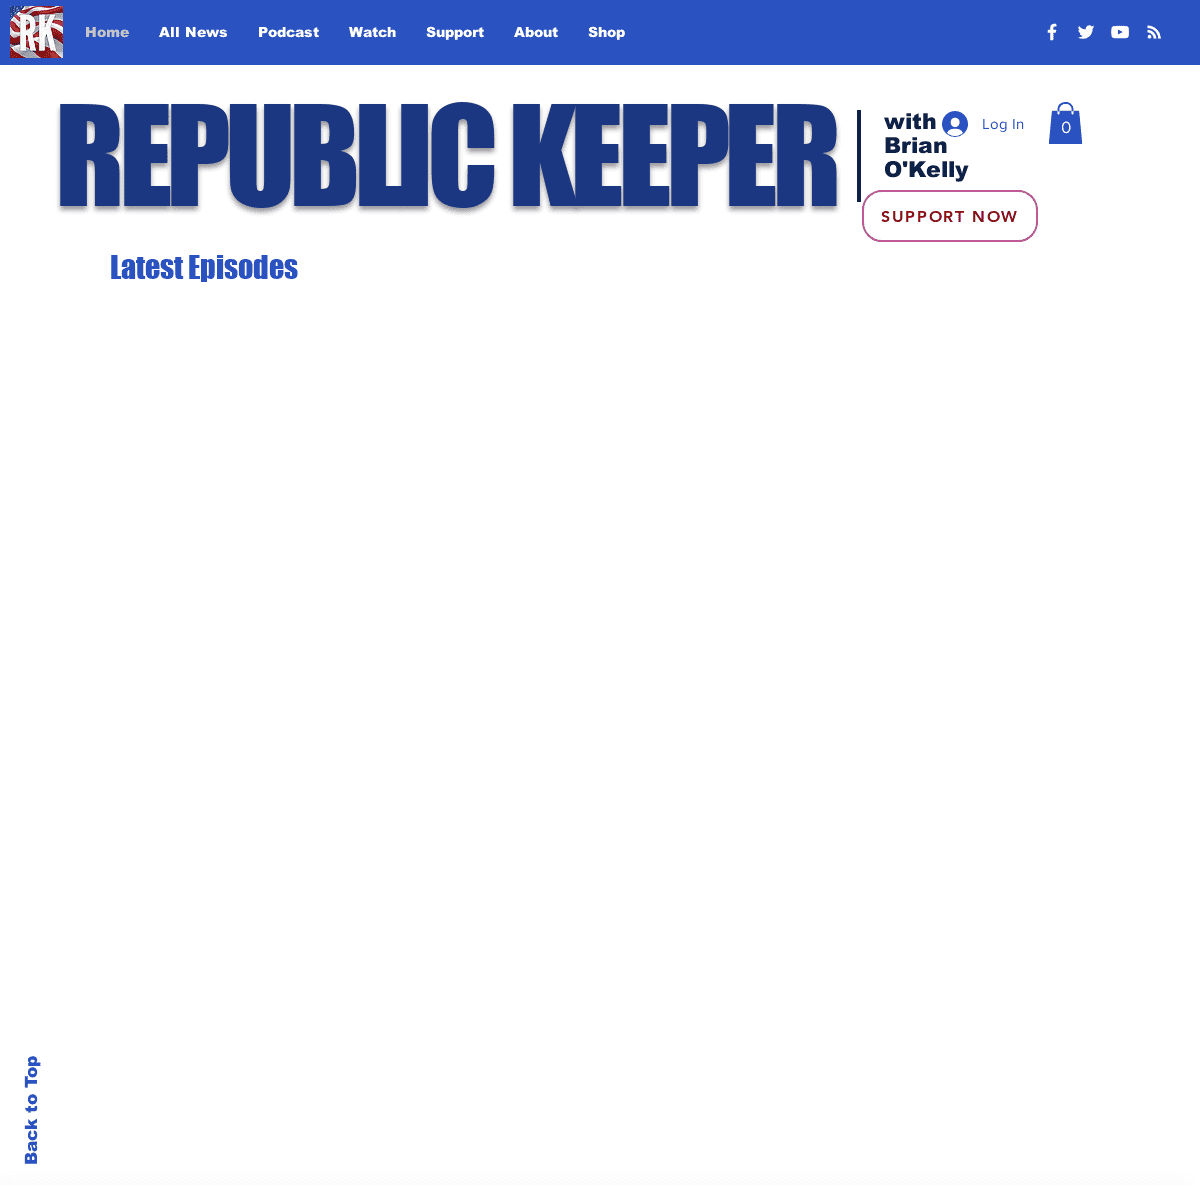 A complete backup of https://republickeeper.com